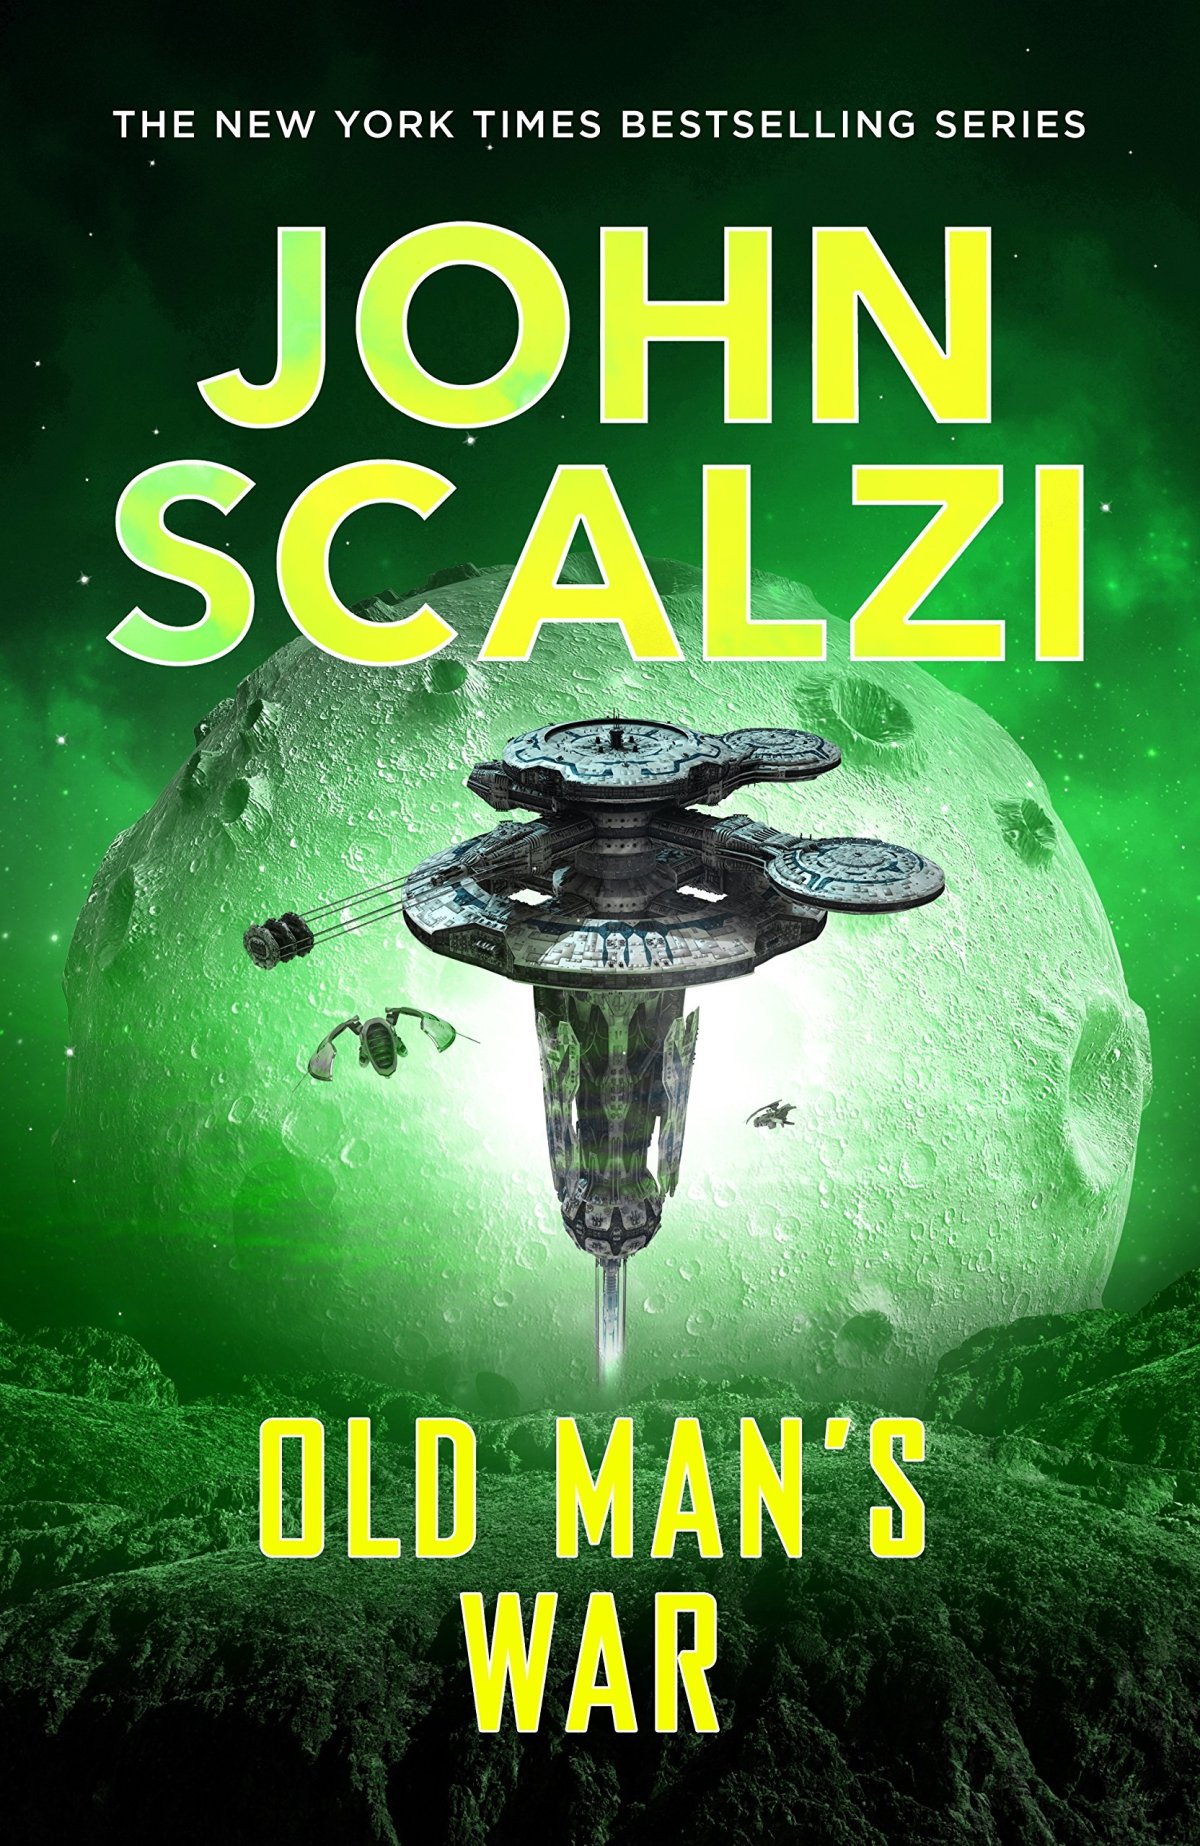 Old Man’s War by John Scalzi📚 BOOK REVIEW